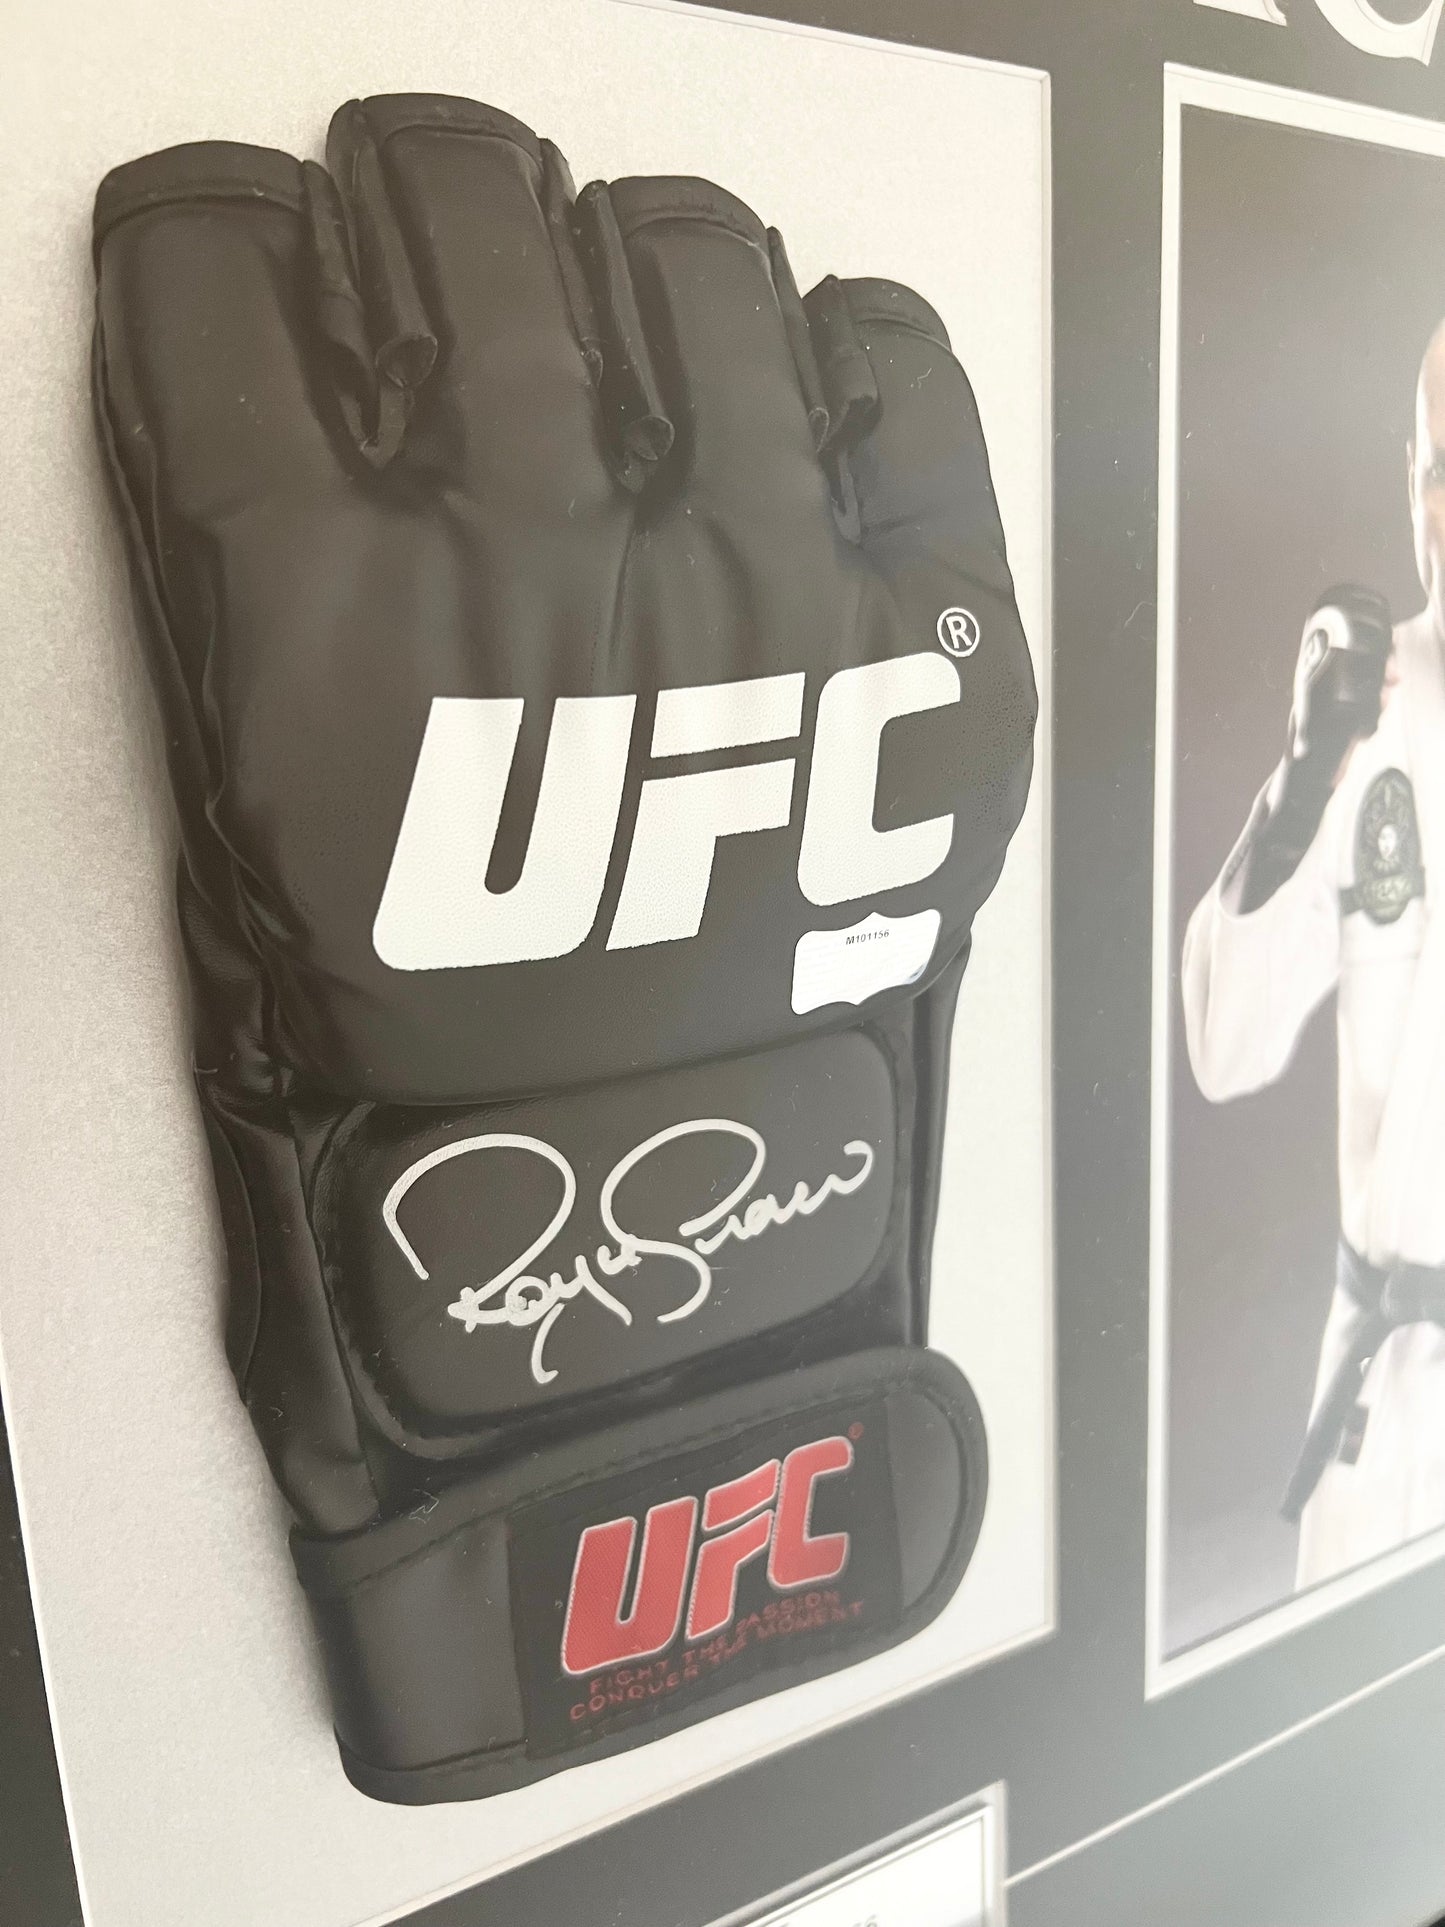 Royce Gracie Signed UFC MMA Autographed fighting Glove Beckett Authentication